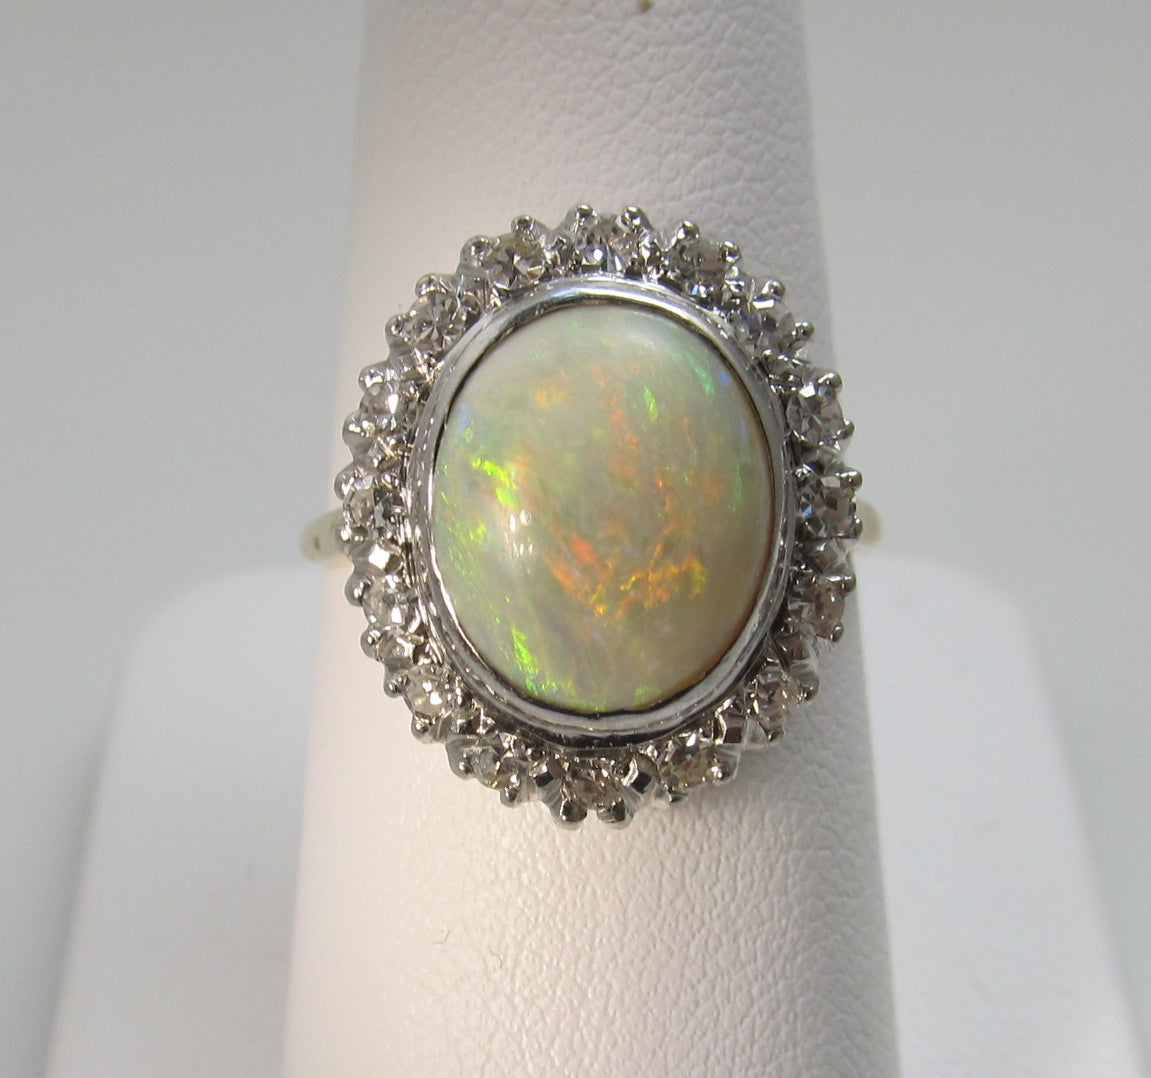 Vintage 14k yellow gold opal and diamond ring